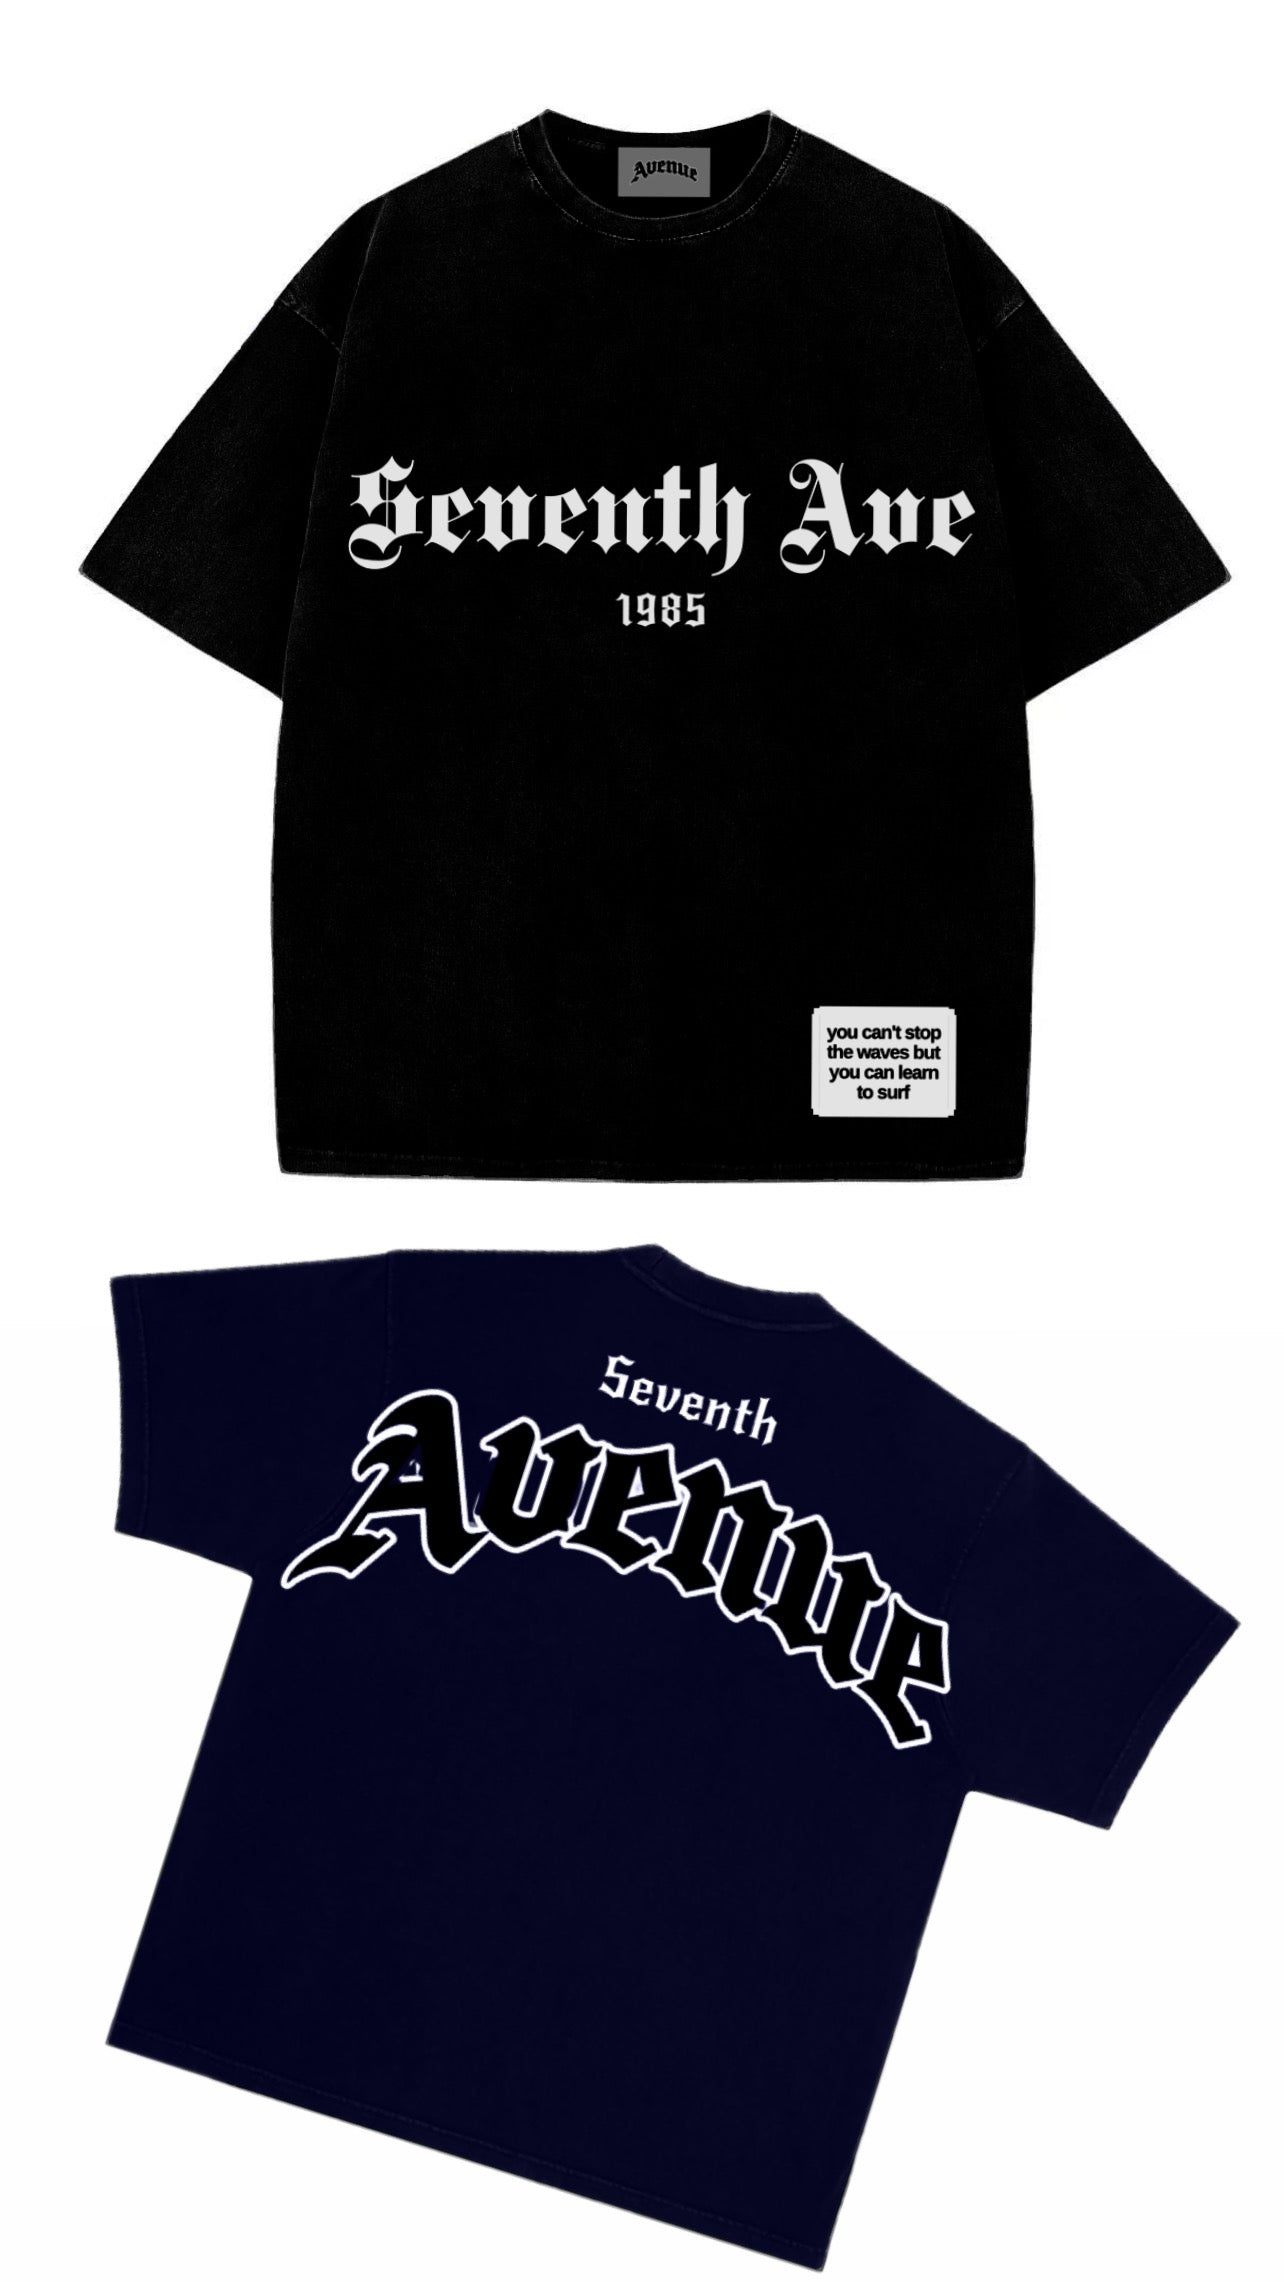 Seventh Ave Signature Black T-Shirt. Available ready to ship.